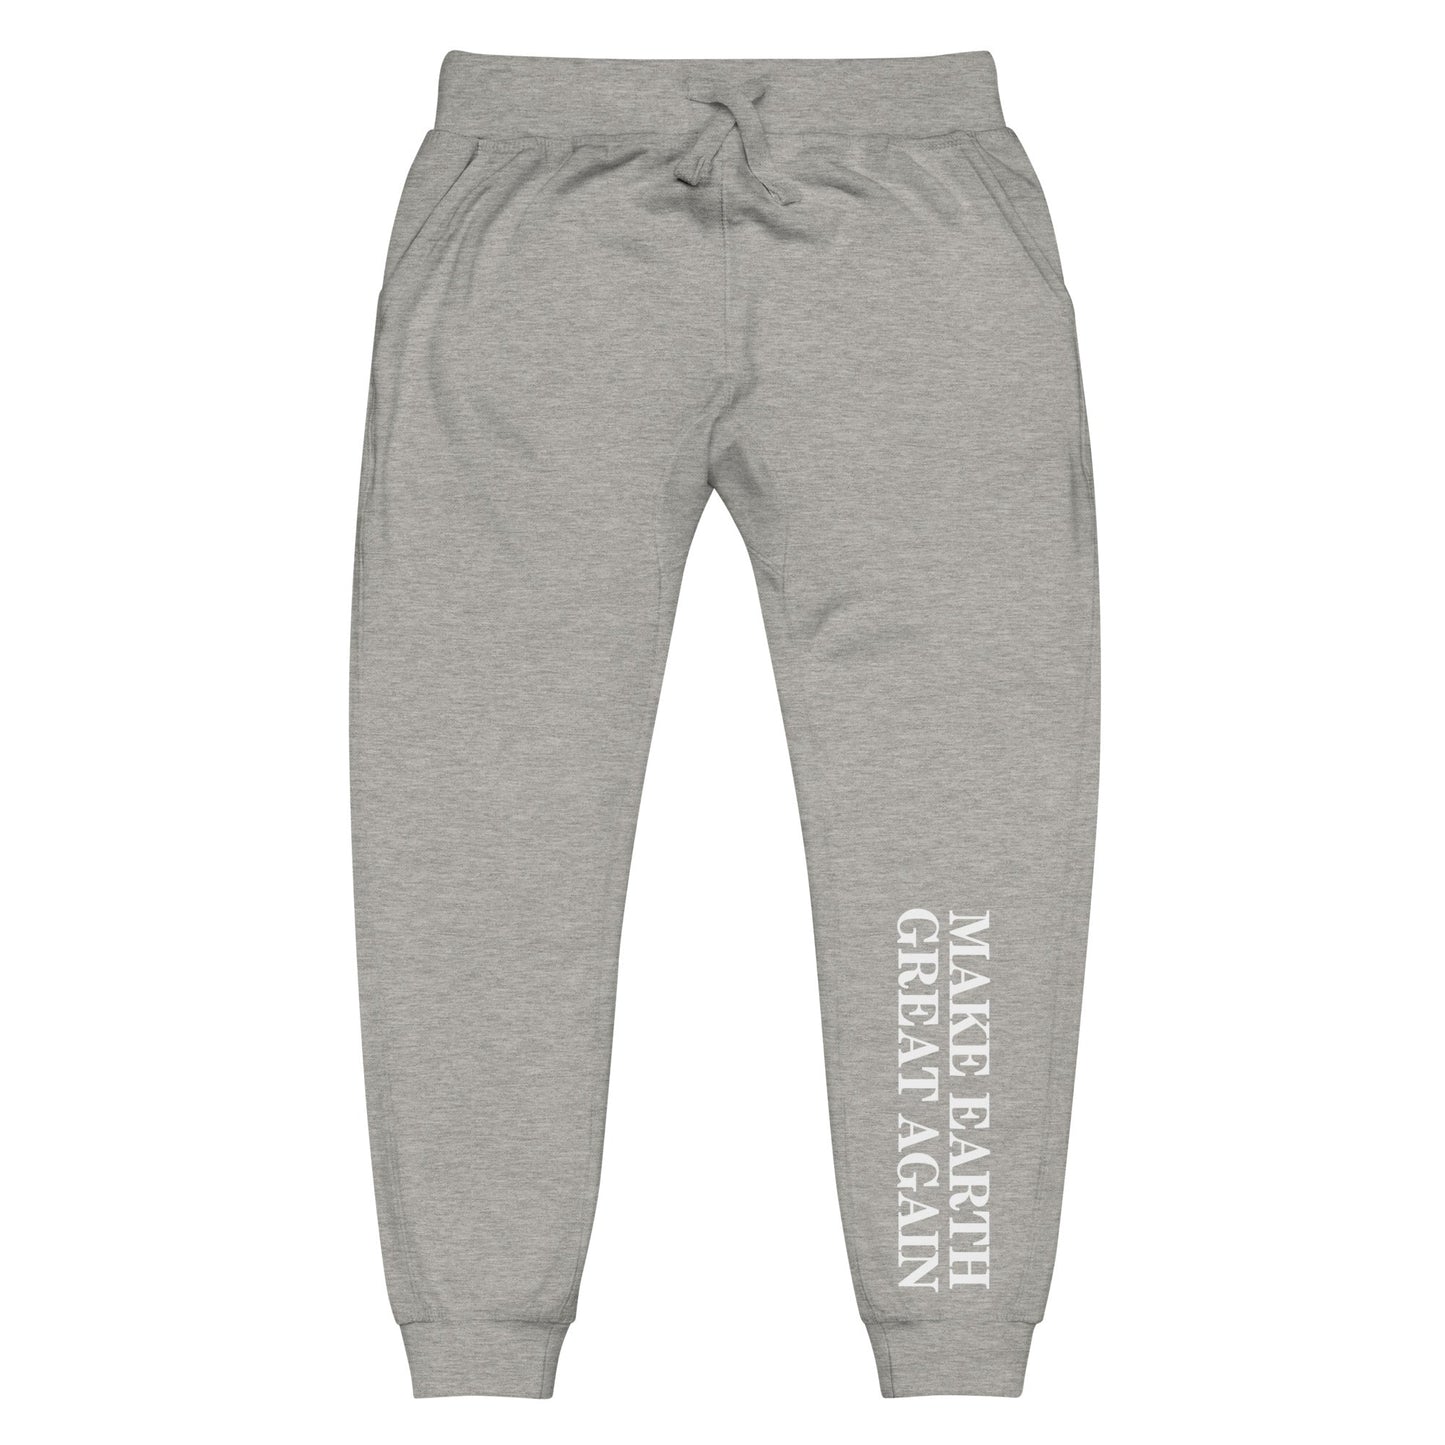 Make Earth Great Again Unisex Fleece Sweatpants - TEAM KENNEDY. All rights reserved